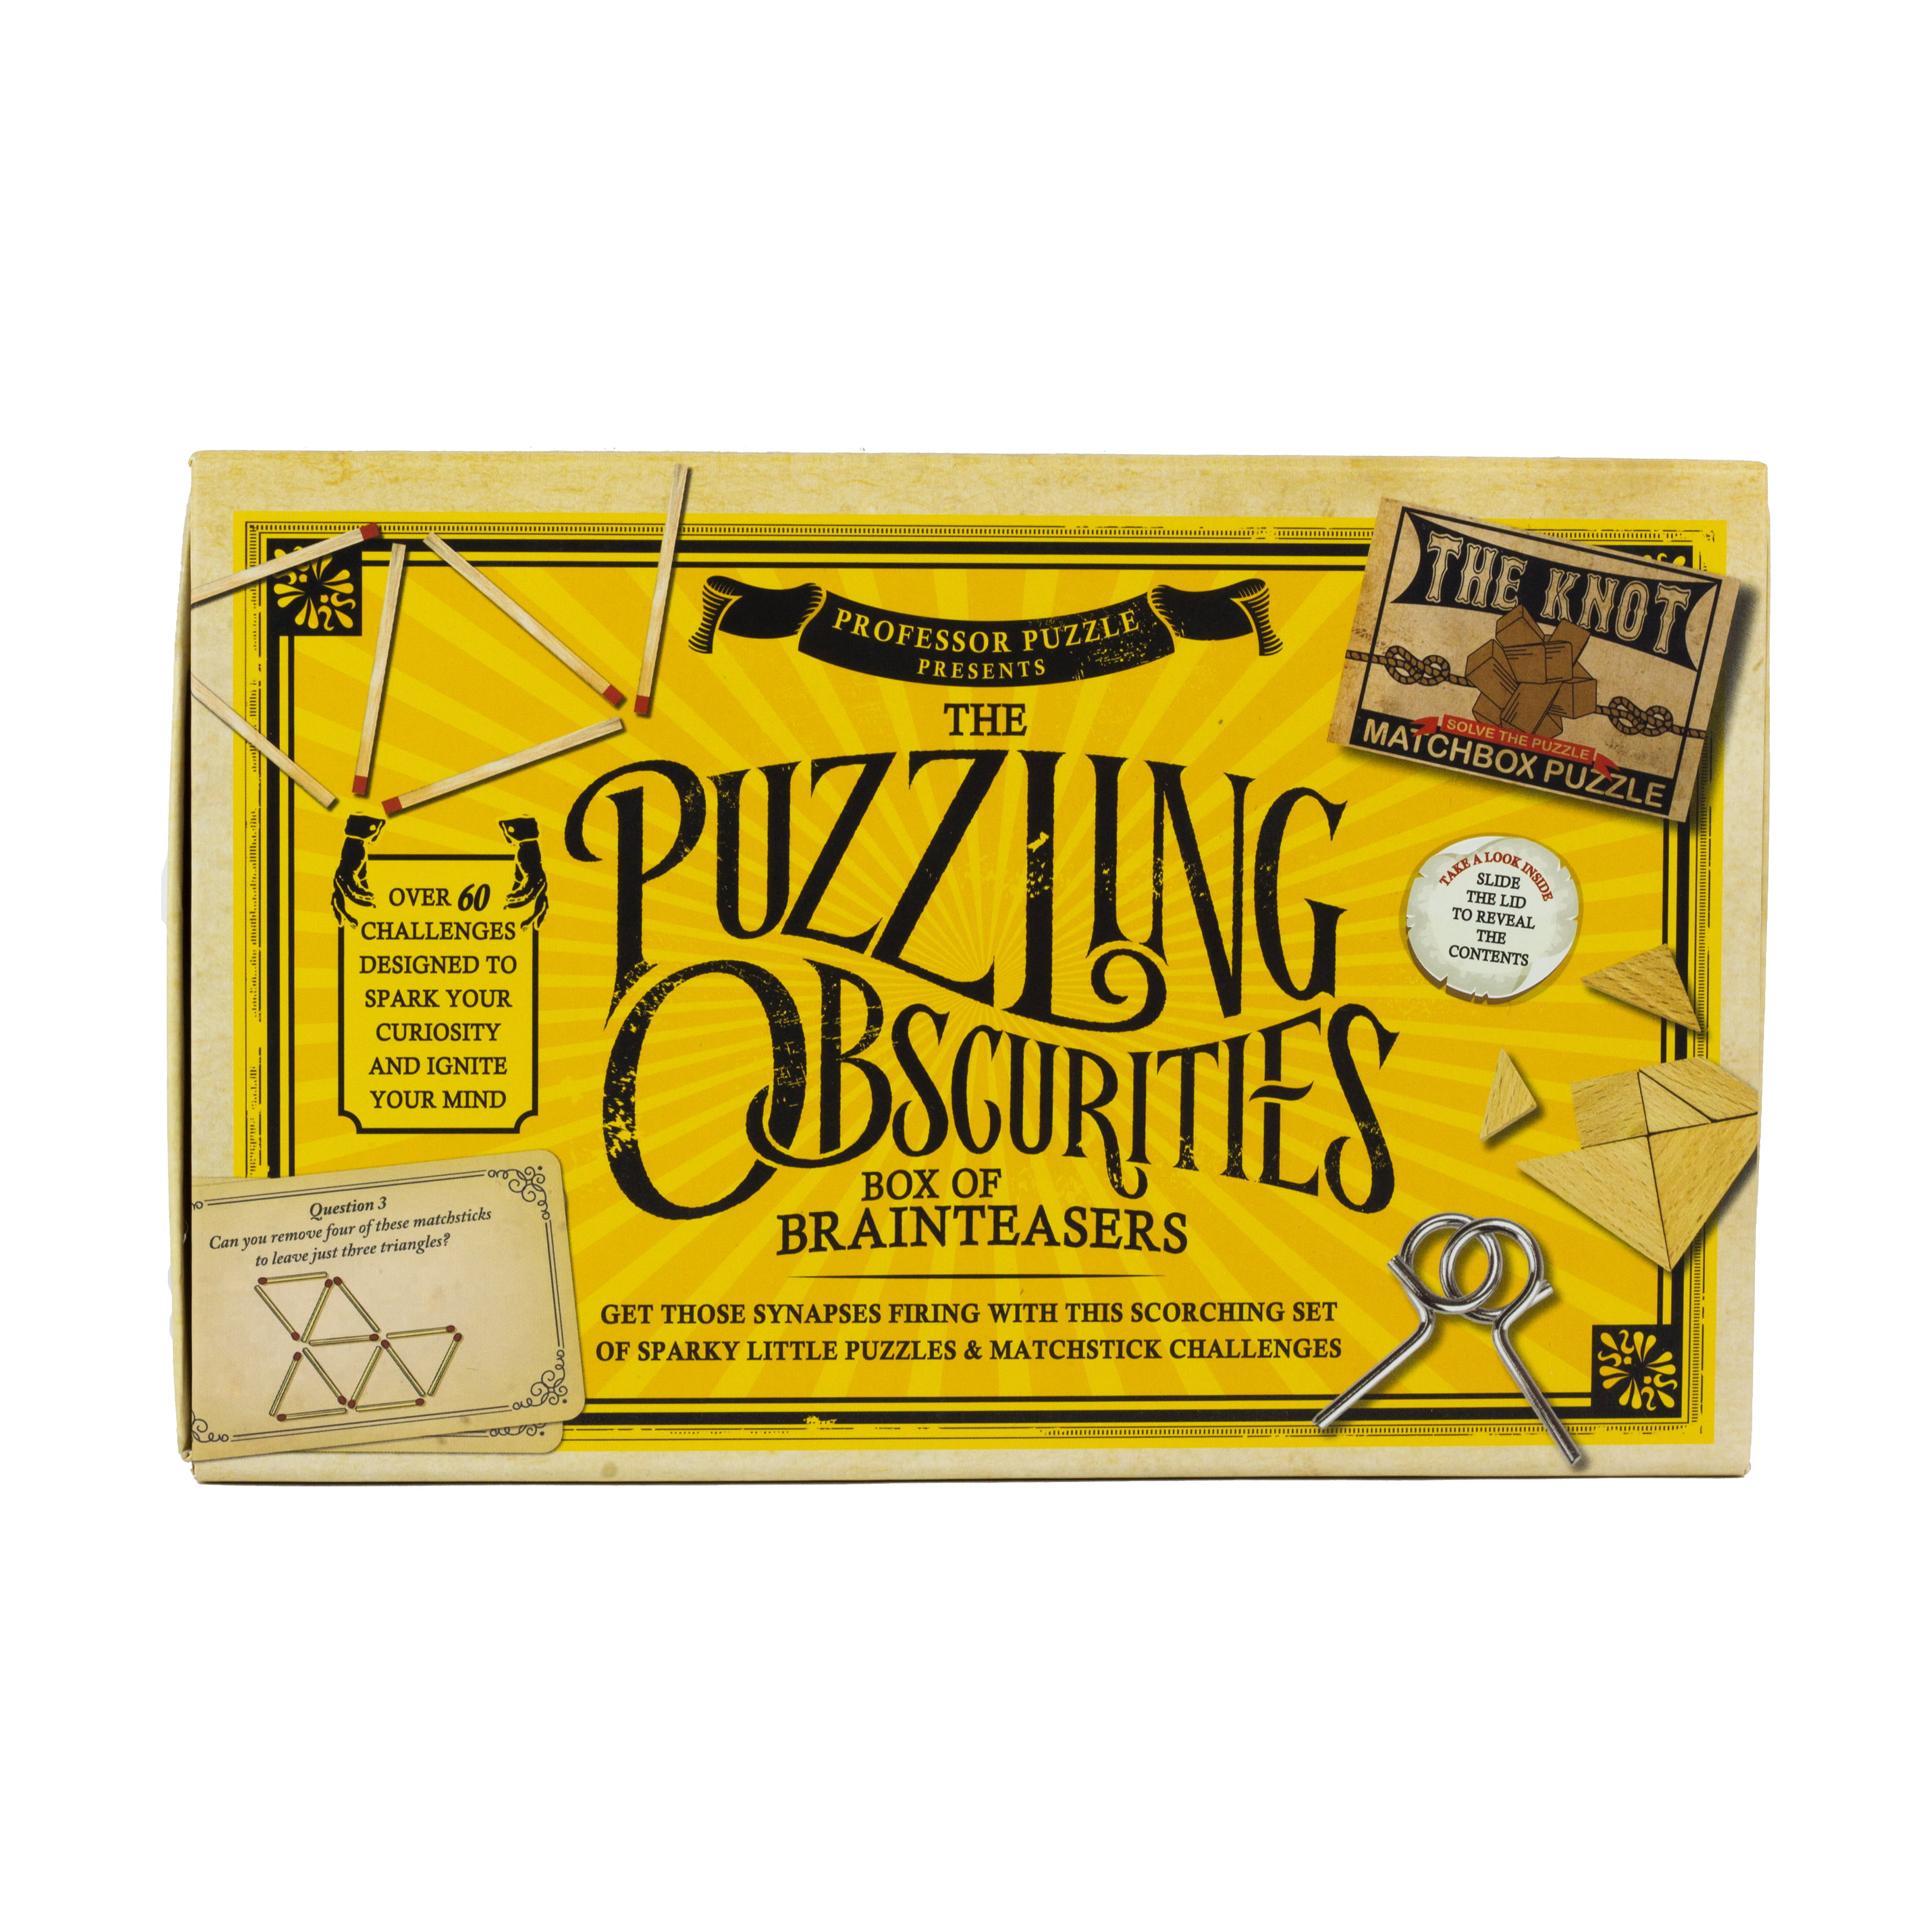 Professor Puzzle The Puzzling Obscurities Box of Brainteasers